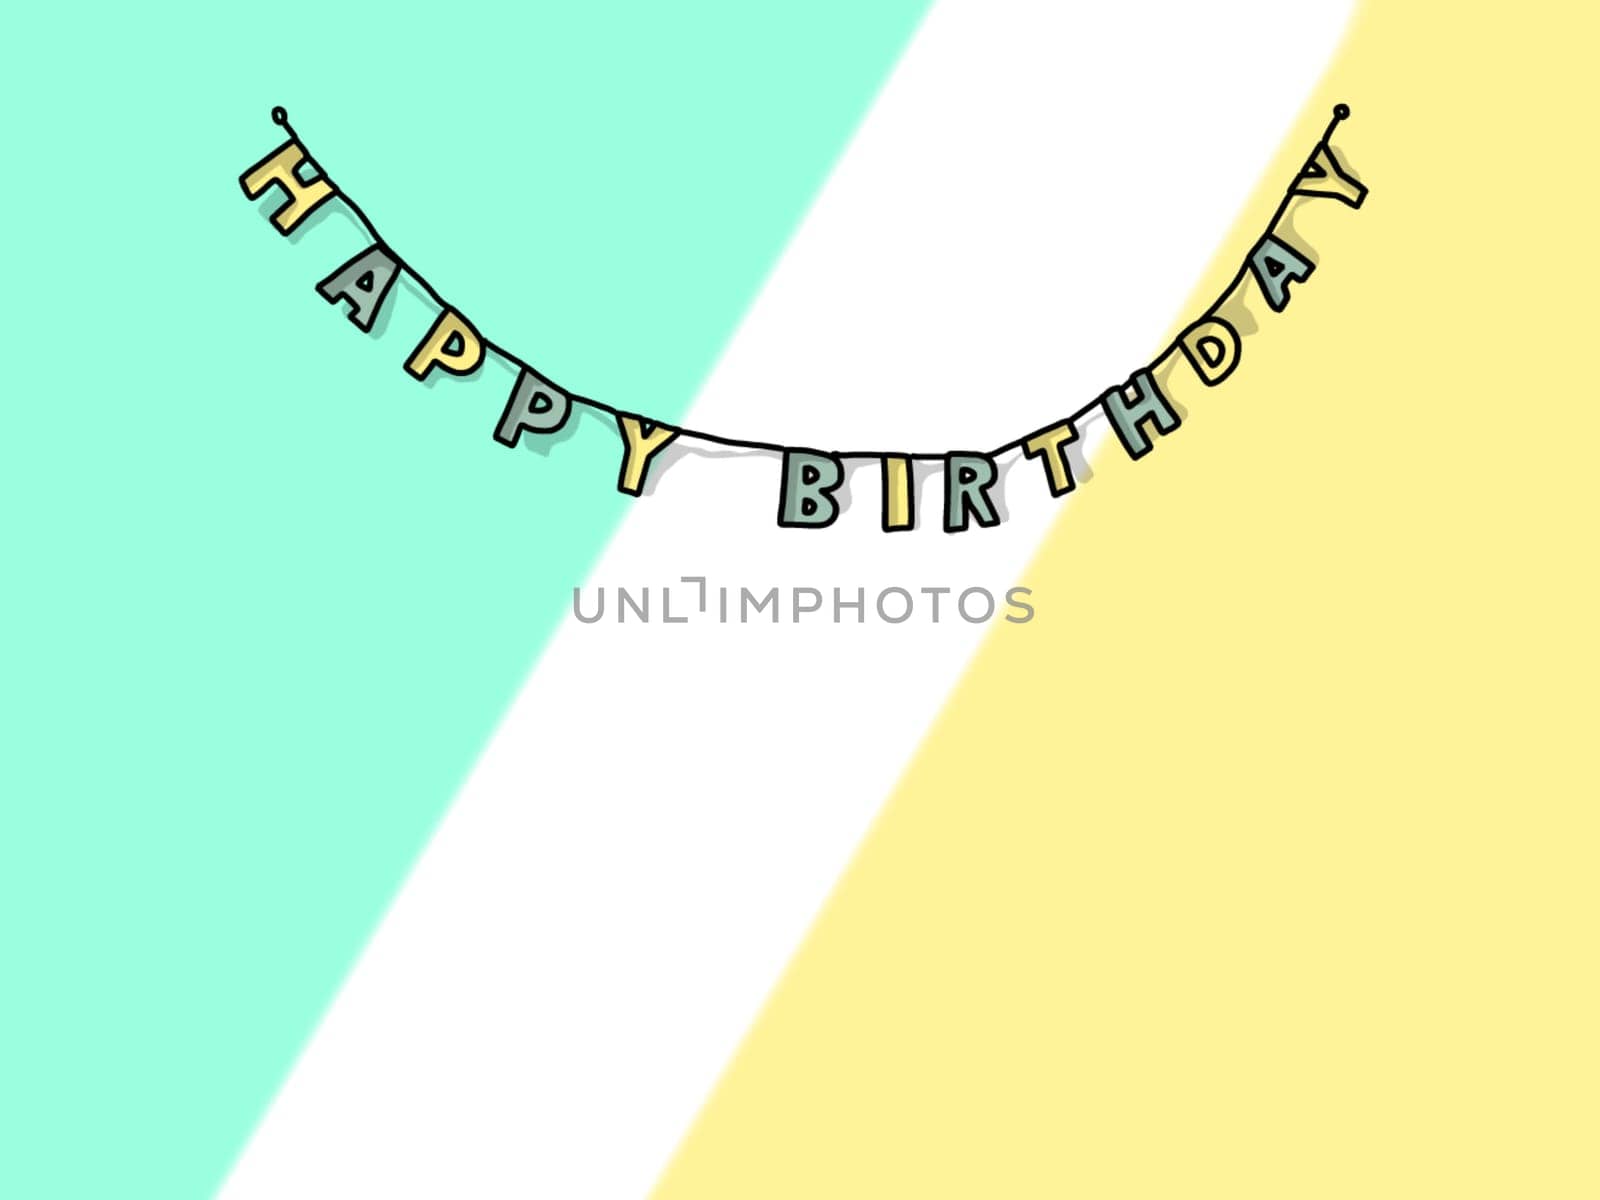 Happy Birthday background with color stripes wallpaper . High quality illustration